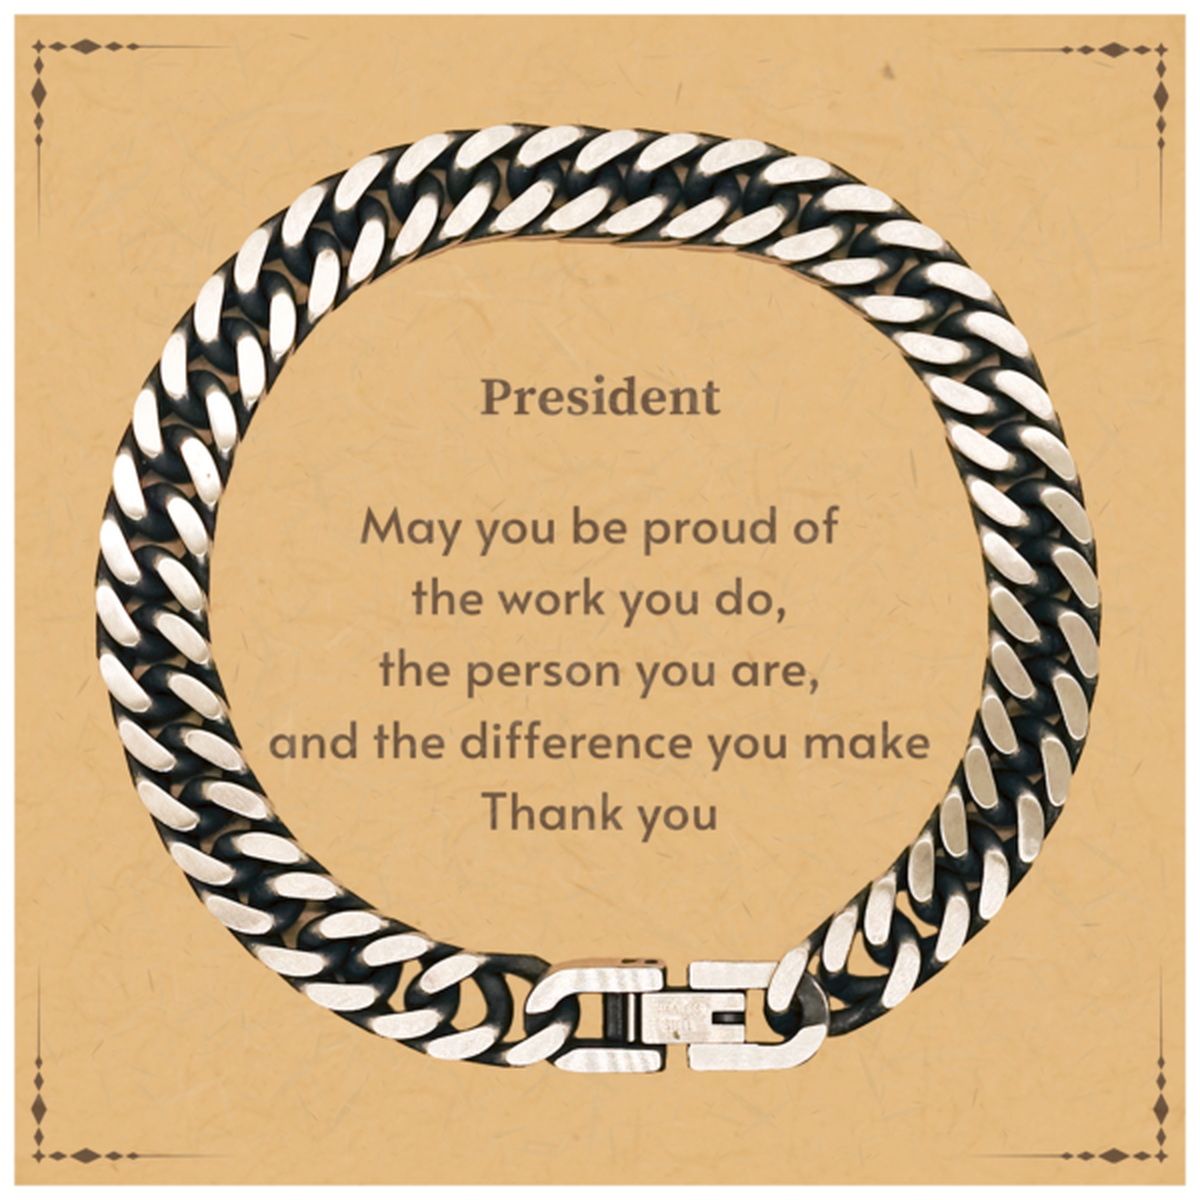 Heartwarming Cuban Link Chain Bracelet Retirement Coworkers Gifts for President, President May You be proud of the work you do, the person you are Gifts for Boss Men Women Friends